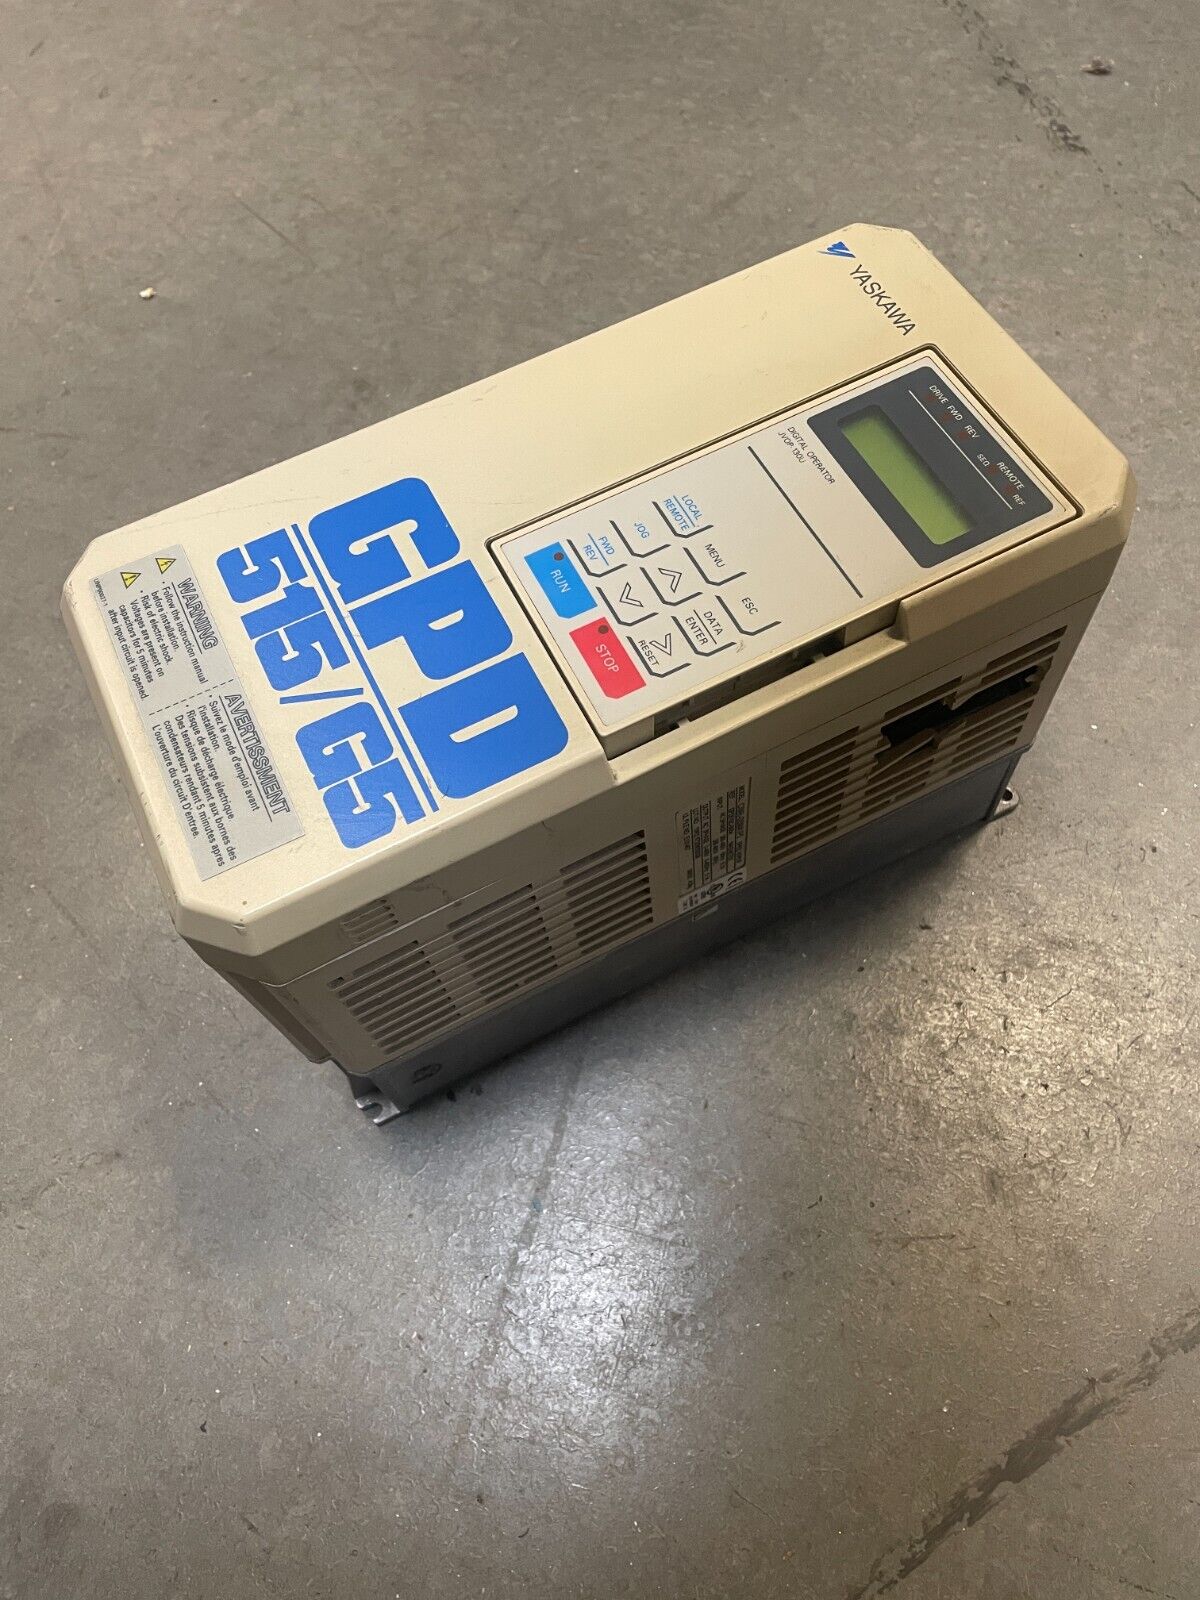 YASKAWA ELECTRIC CIMR-G5M41P5 / CIMRG5M41P5 (USED TESTED CLEANED) @2A